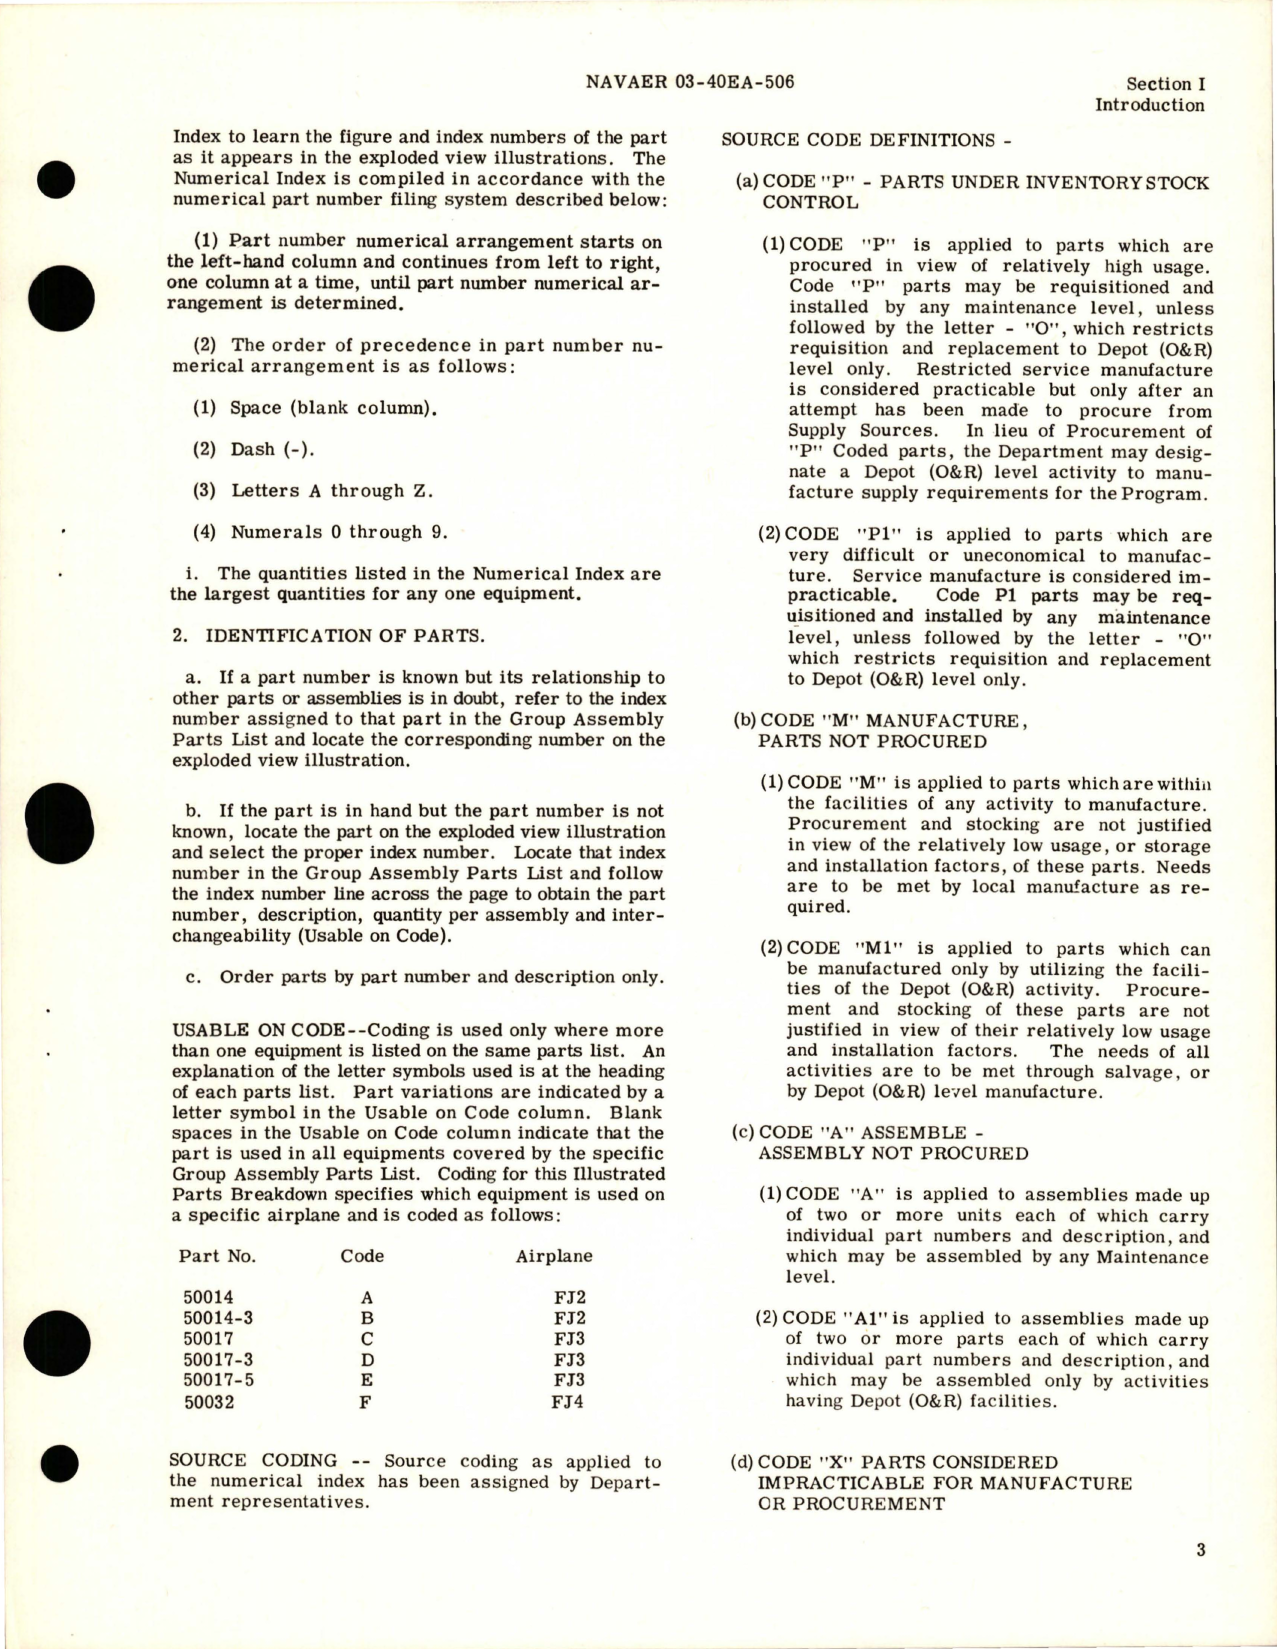 Sample page 5 from AirCorps Library document: Illustrated Parts Breakdown for Engine Power Control Quadrants - Parts 50014, 50014-3, 50017, 50017-3, 50017-5, and 50032